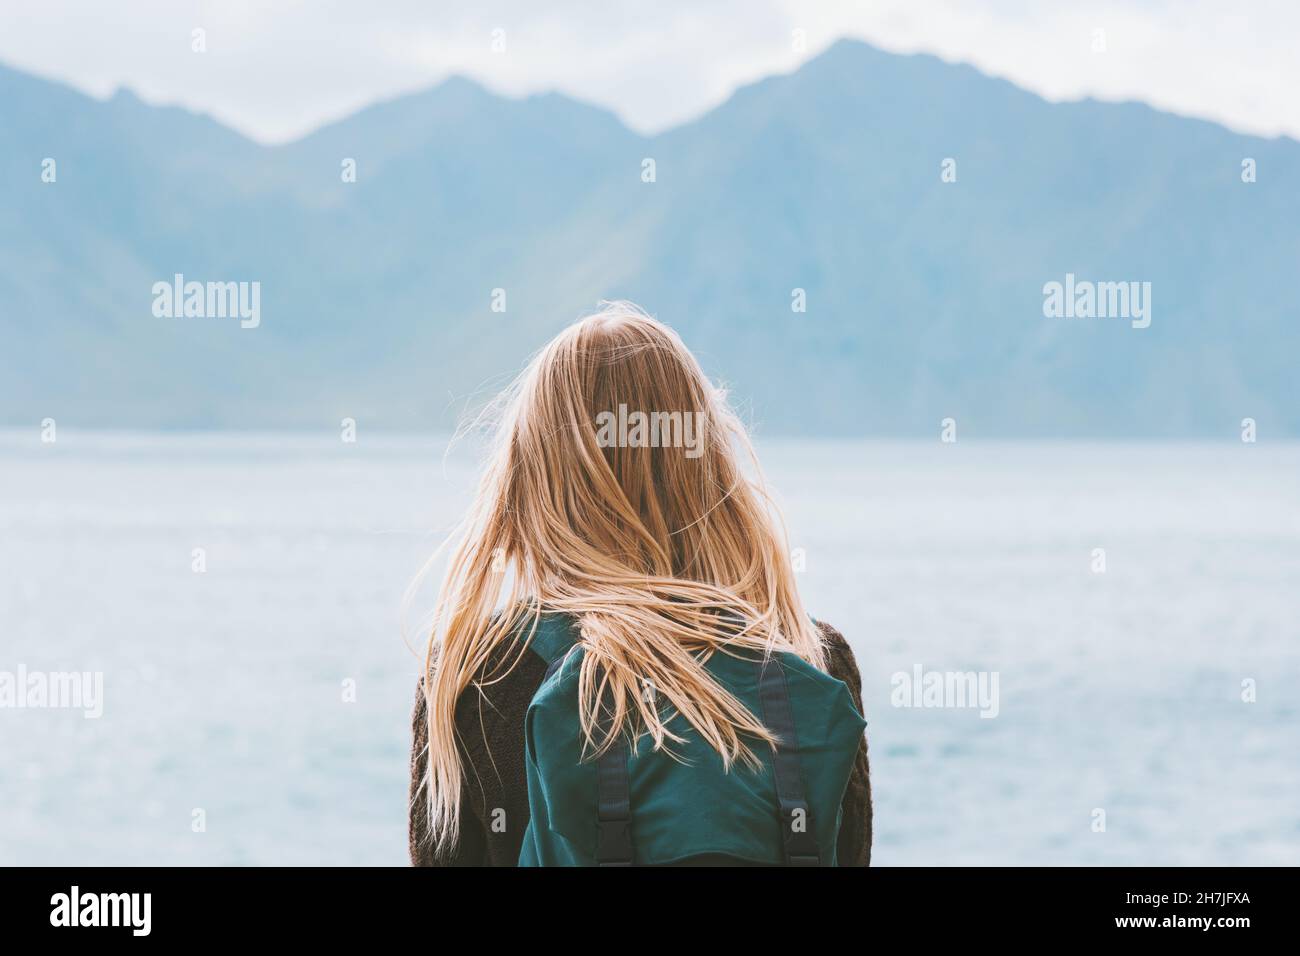 Travel in Norway globetrotter woman with backpack looking at mountains view alone outdoor active vacations adventure lifestyle solo trip Stock Photo